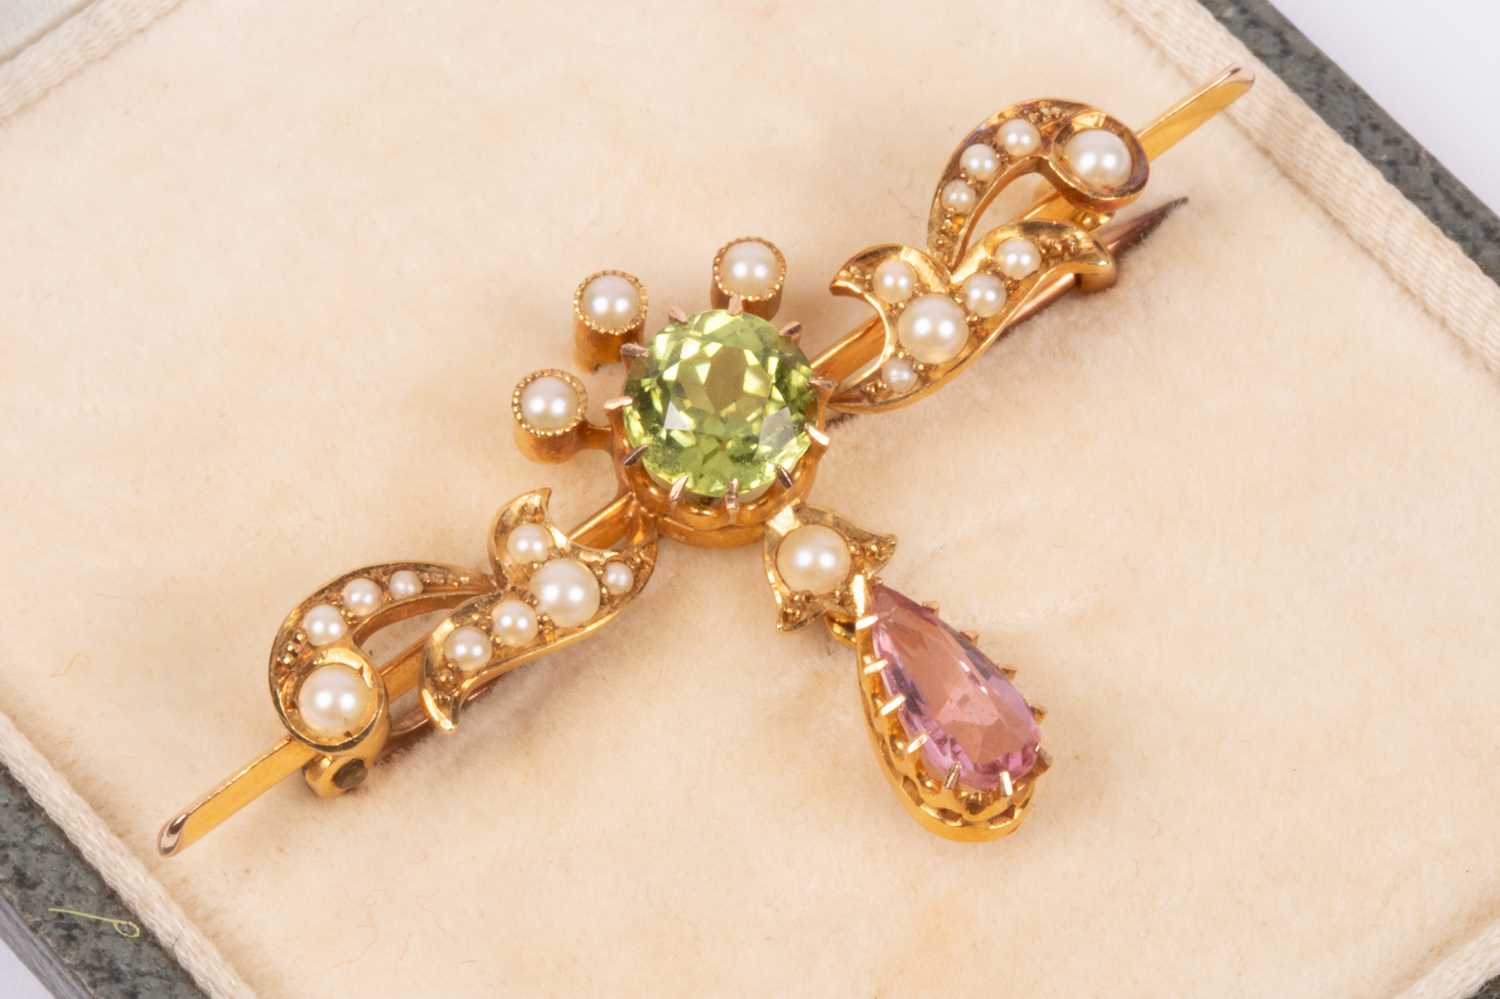 Lot 120 - An Edwardian Suffragette style 15ct yellow gold peridot, pink tourmaline and seed pearl bar brooch